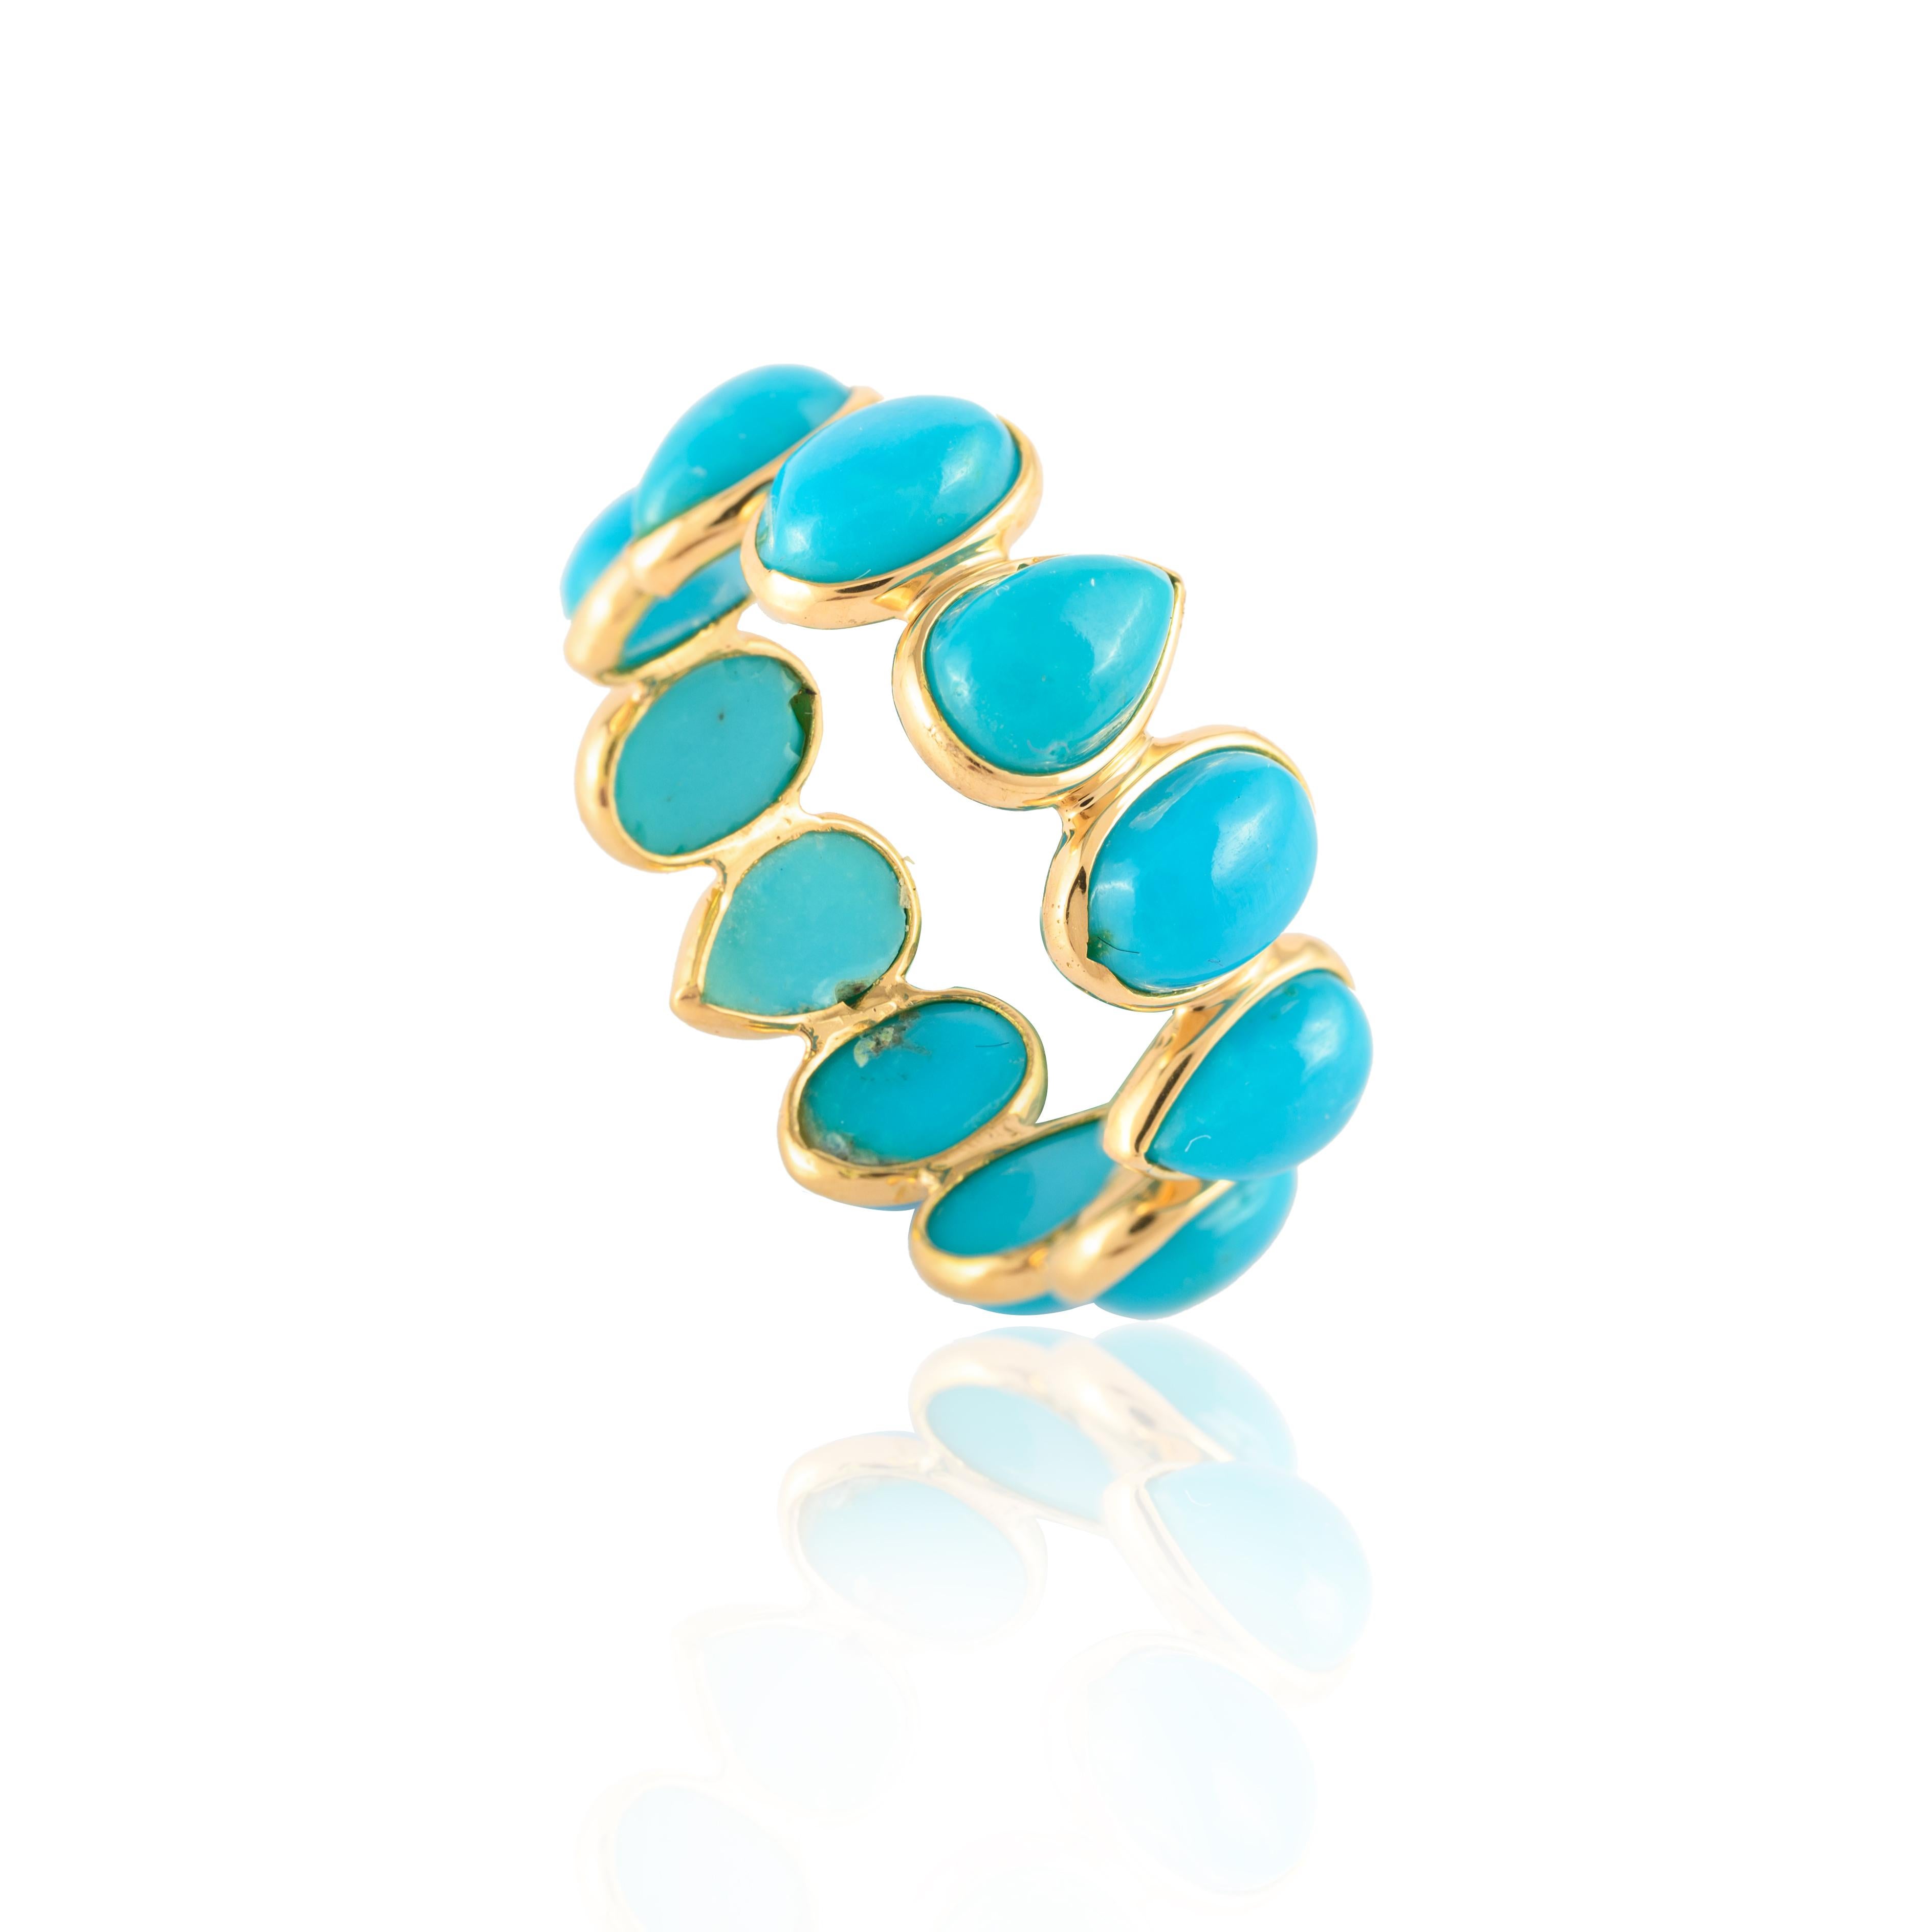 For Sale:  Minimal 18k Yellow Gold 6.2 Carat Turquoise Eternity Band Ring 10